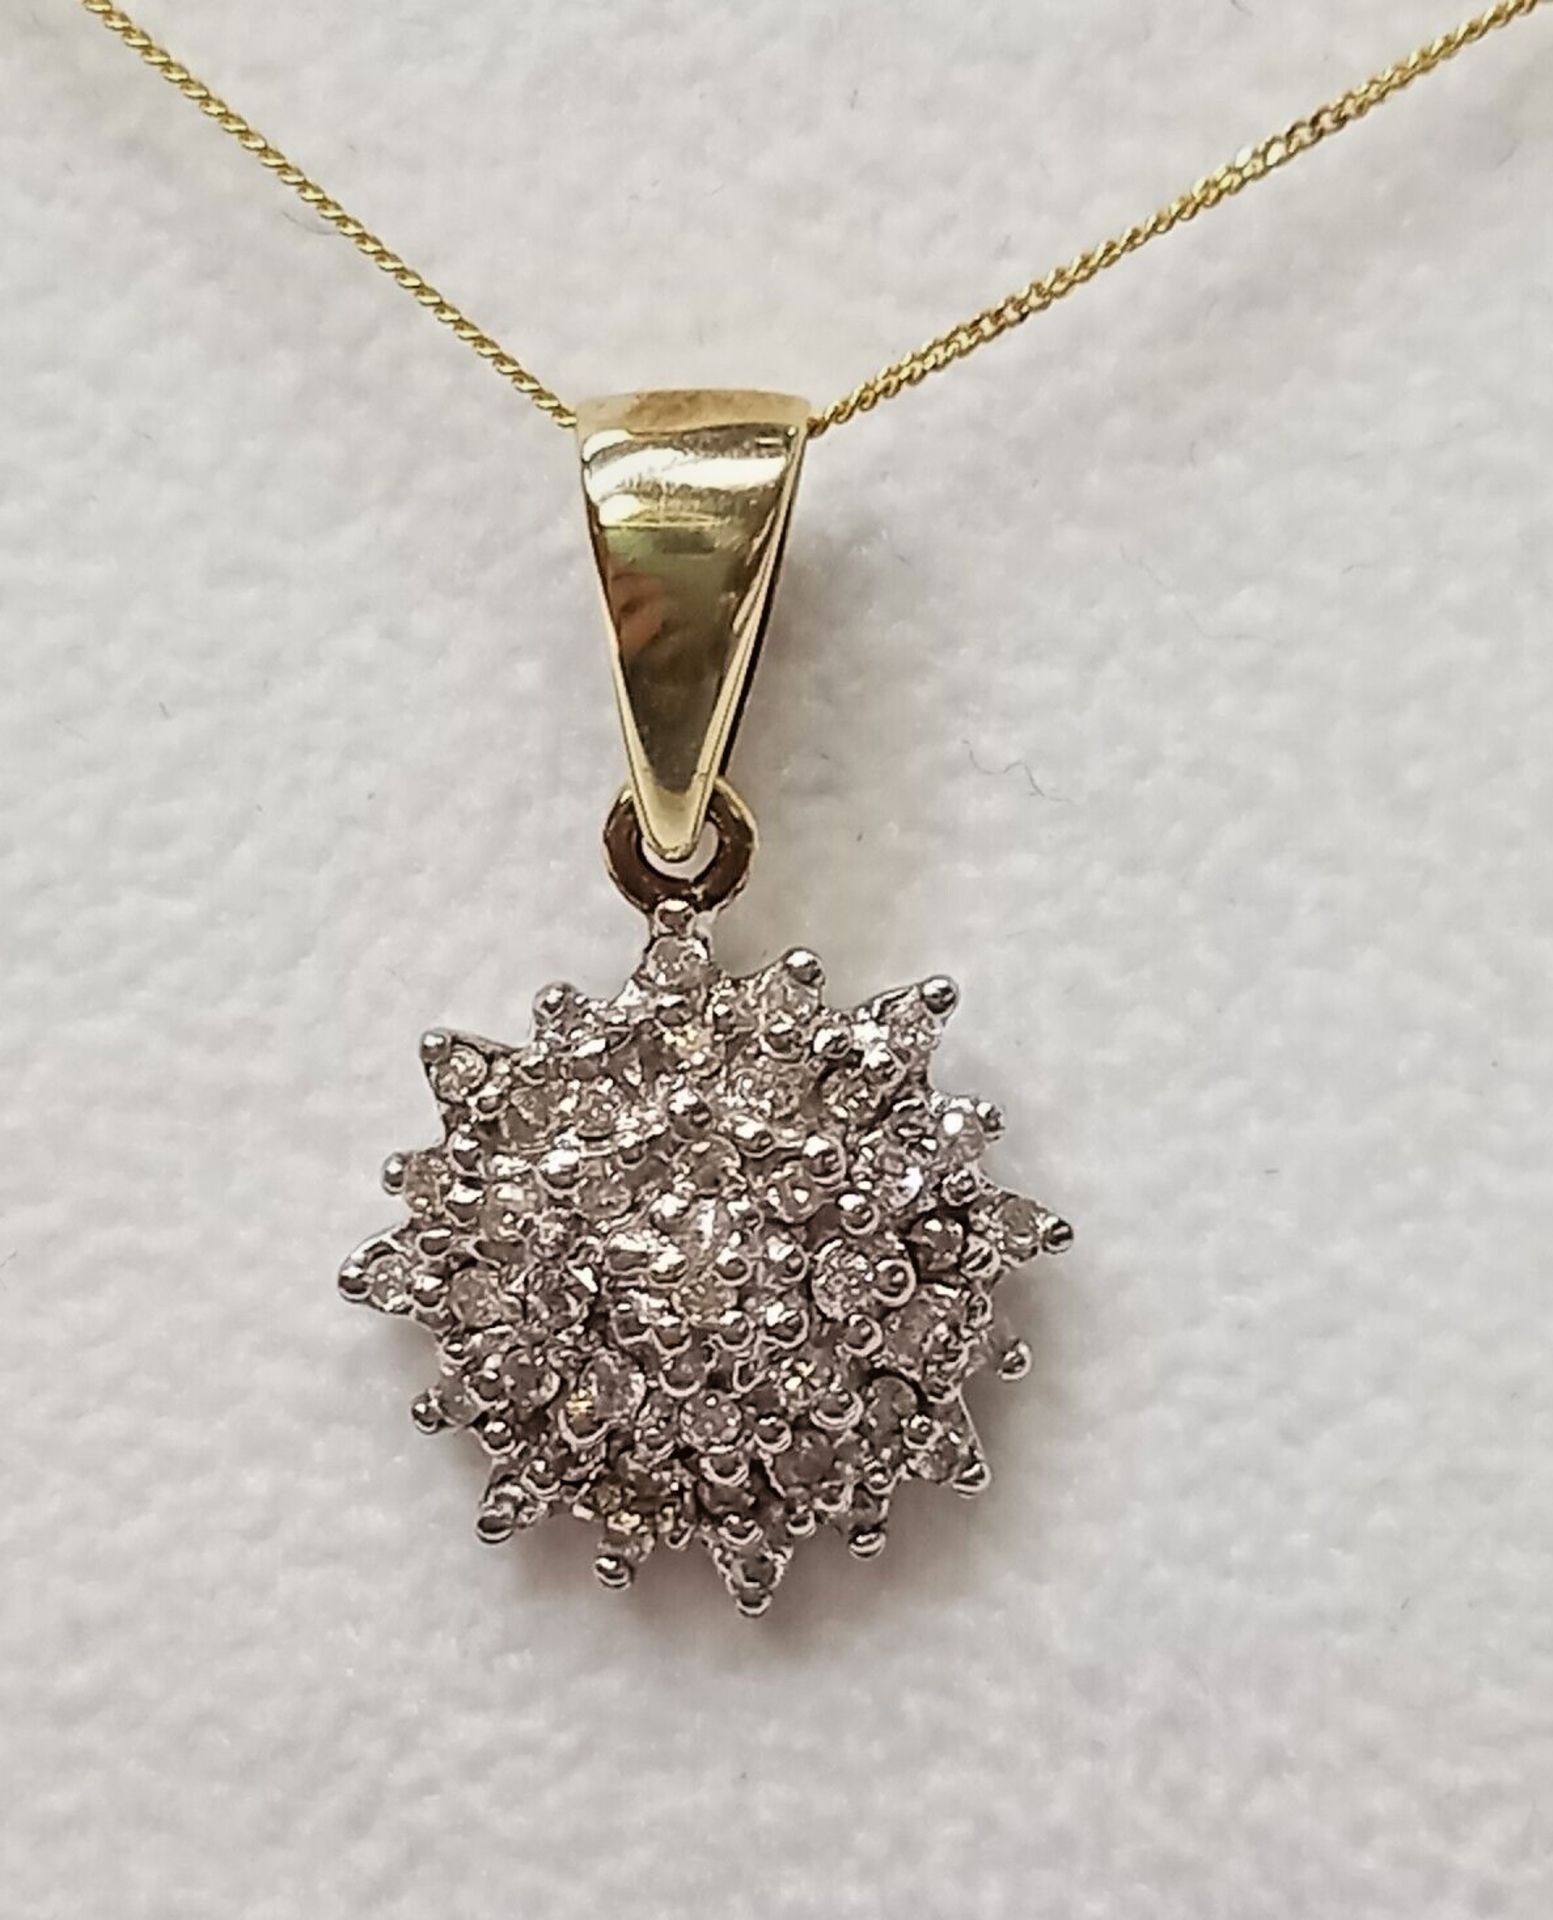 0.35CT CLUSTER DIAMOND PENDANT/9CT YELLOW GOLD IN GIFT BOX WITH VALUATION CERTIFICATE OF £1095 - Image 2 of 3